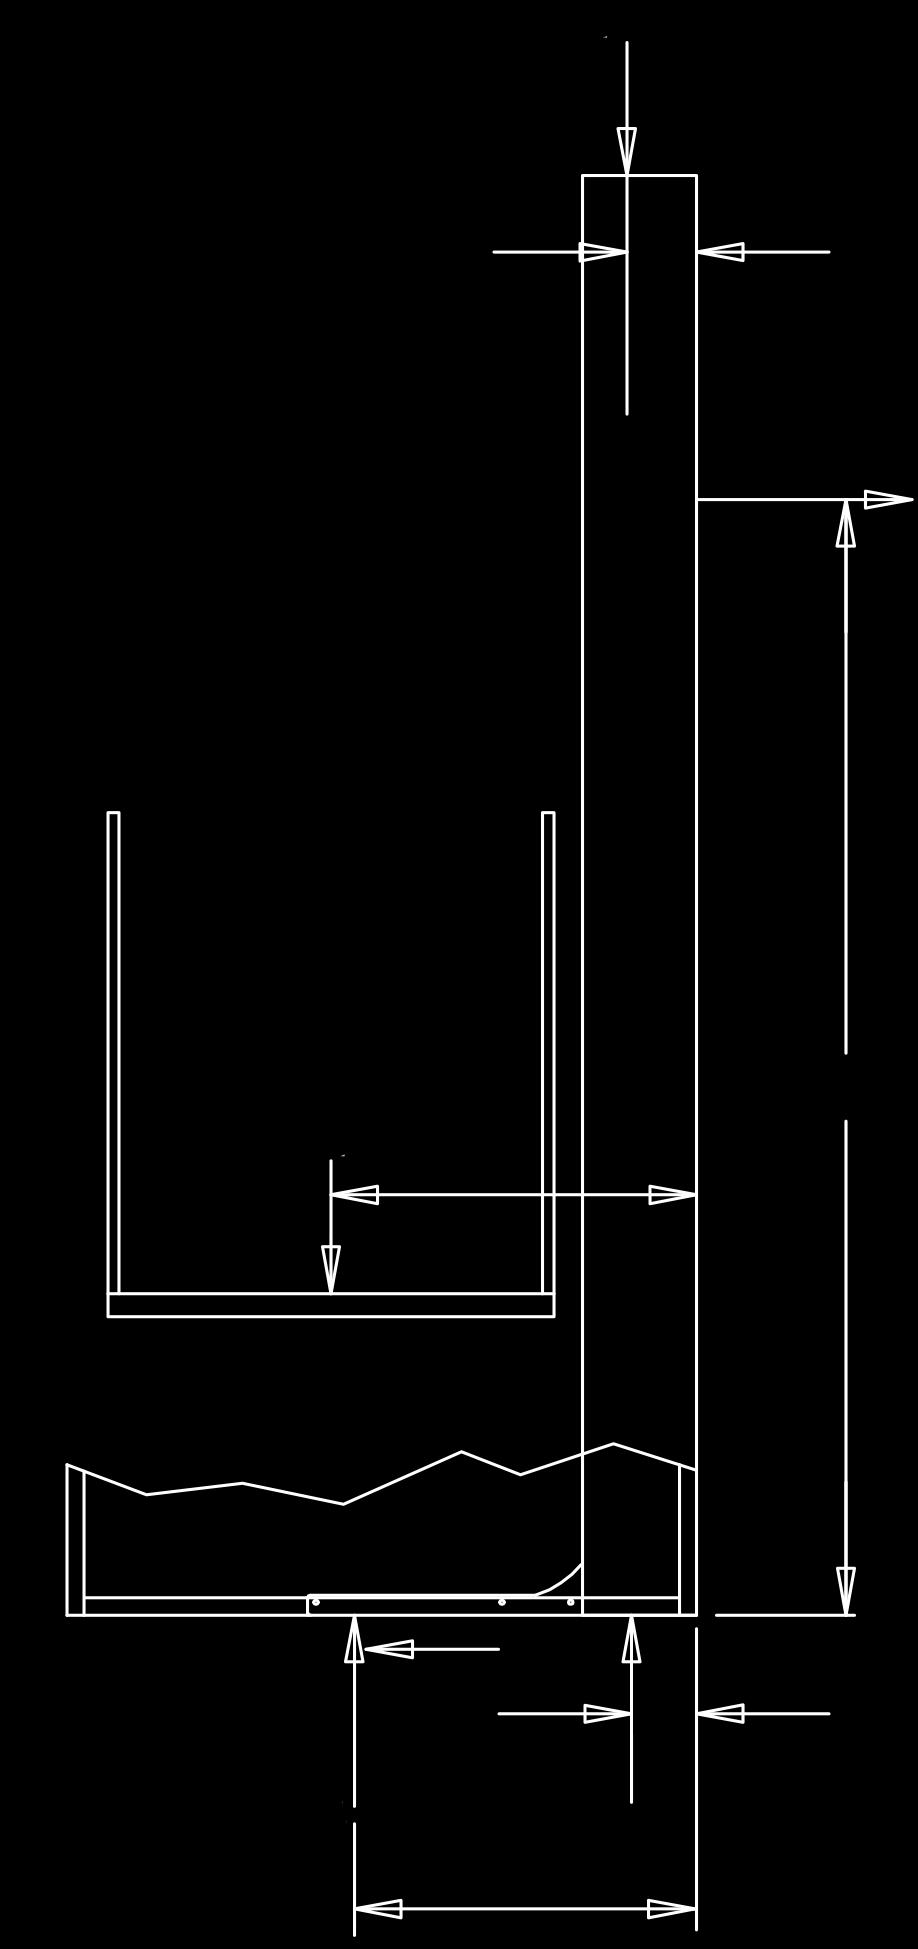 Reaction Forces Generic Static Loading Table for Vertical Lifts Anchored to Floor and Wall F2 Symbol Description Value (Max) F1=1090 lb. Payload (Max) 750 lb. Car () Wt. Max 340 lb.